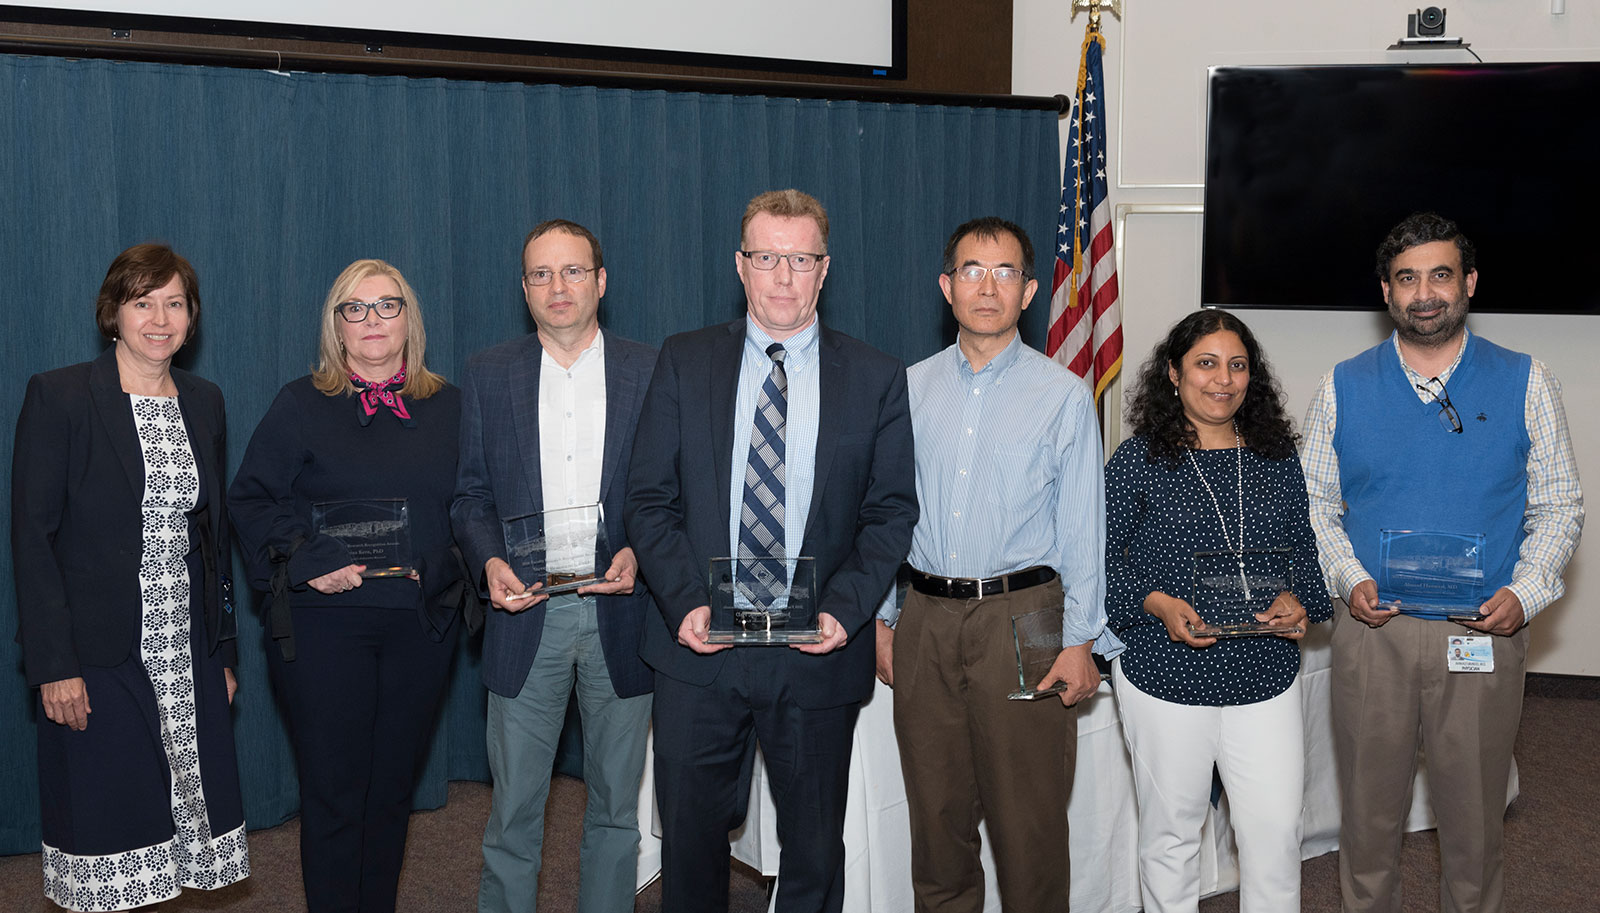 The 2018 Outstanding Collaborative Research Award was presented to a team from Penn State Tobacco Center of Regulatory Science. A group of six people are pictured holding awards, with Dr. Leslie Parent, Vice Dean for Research and Graduate Studies at Penn State College of Medicine, standing at left.